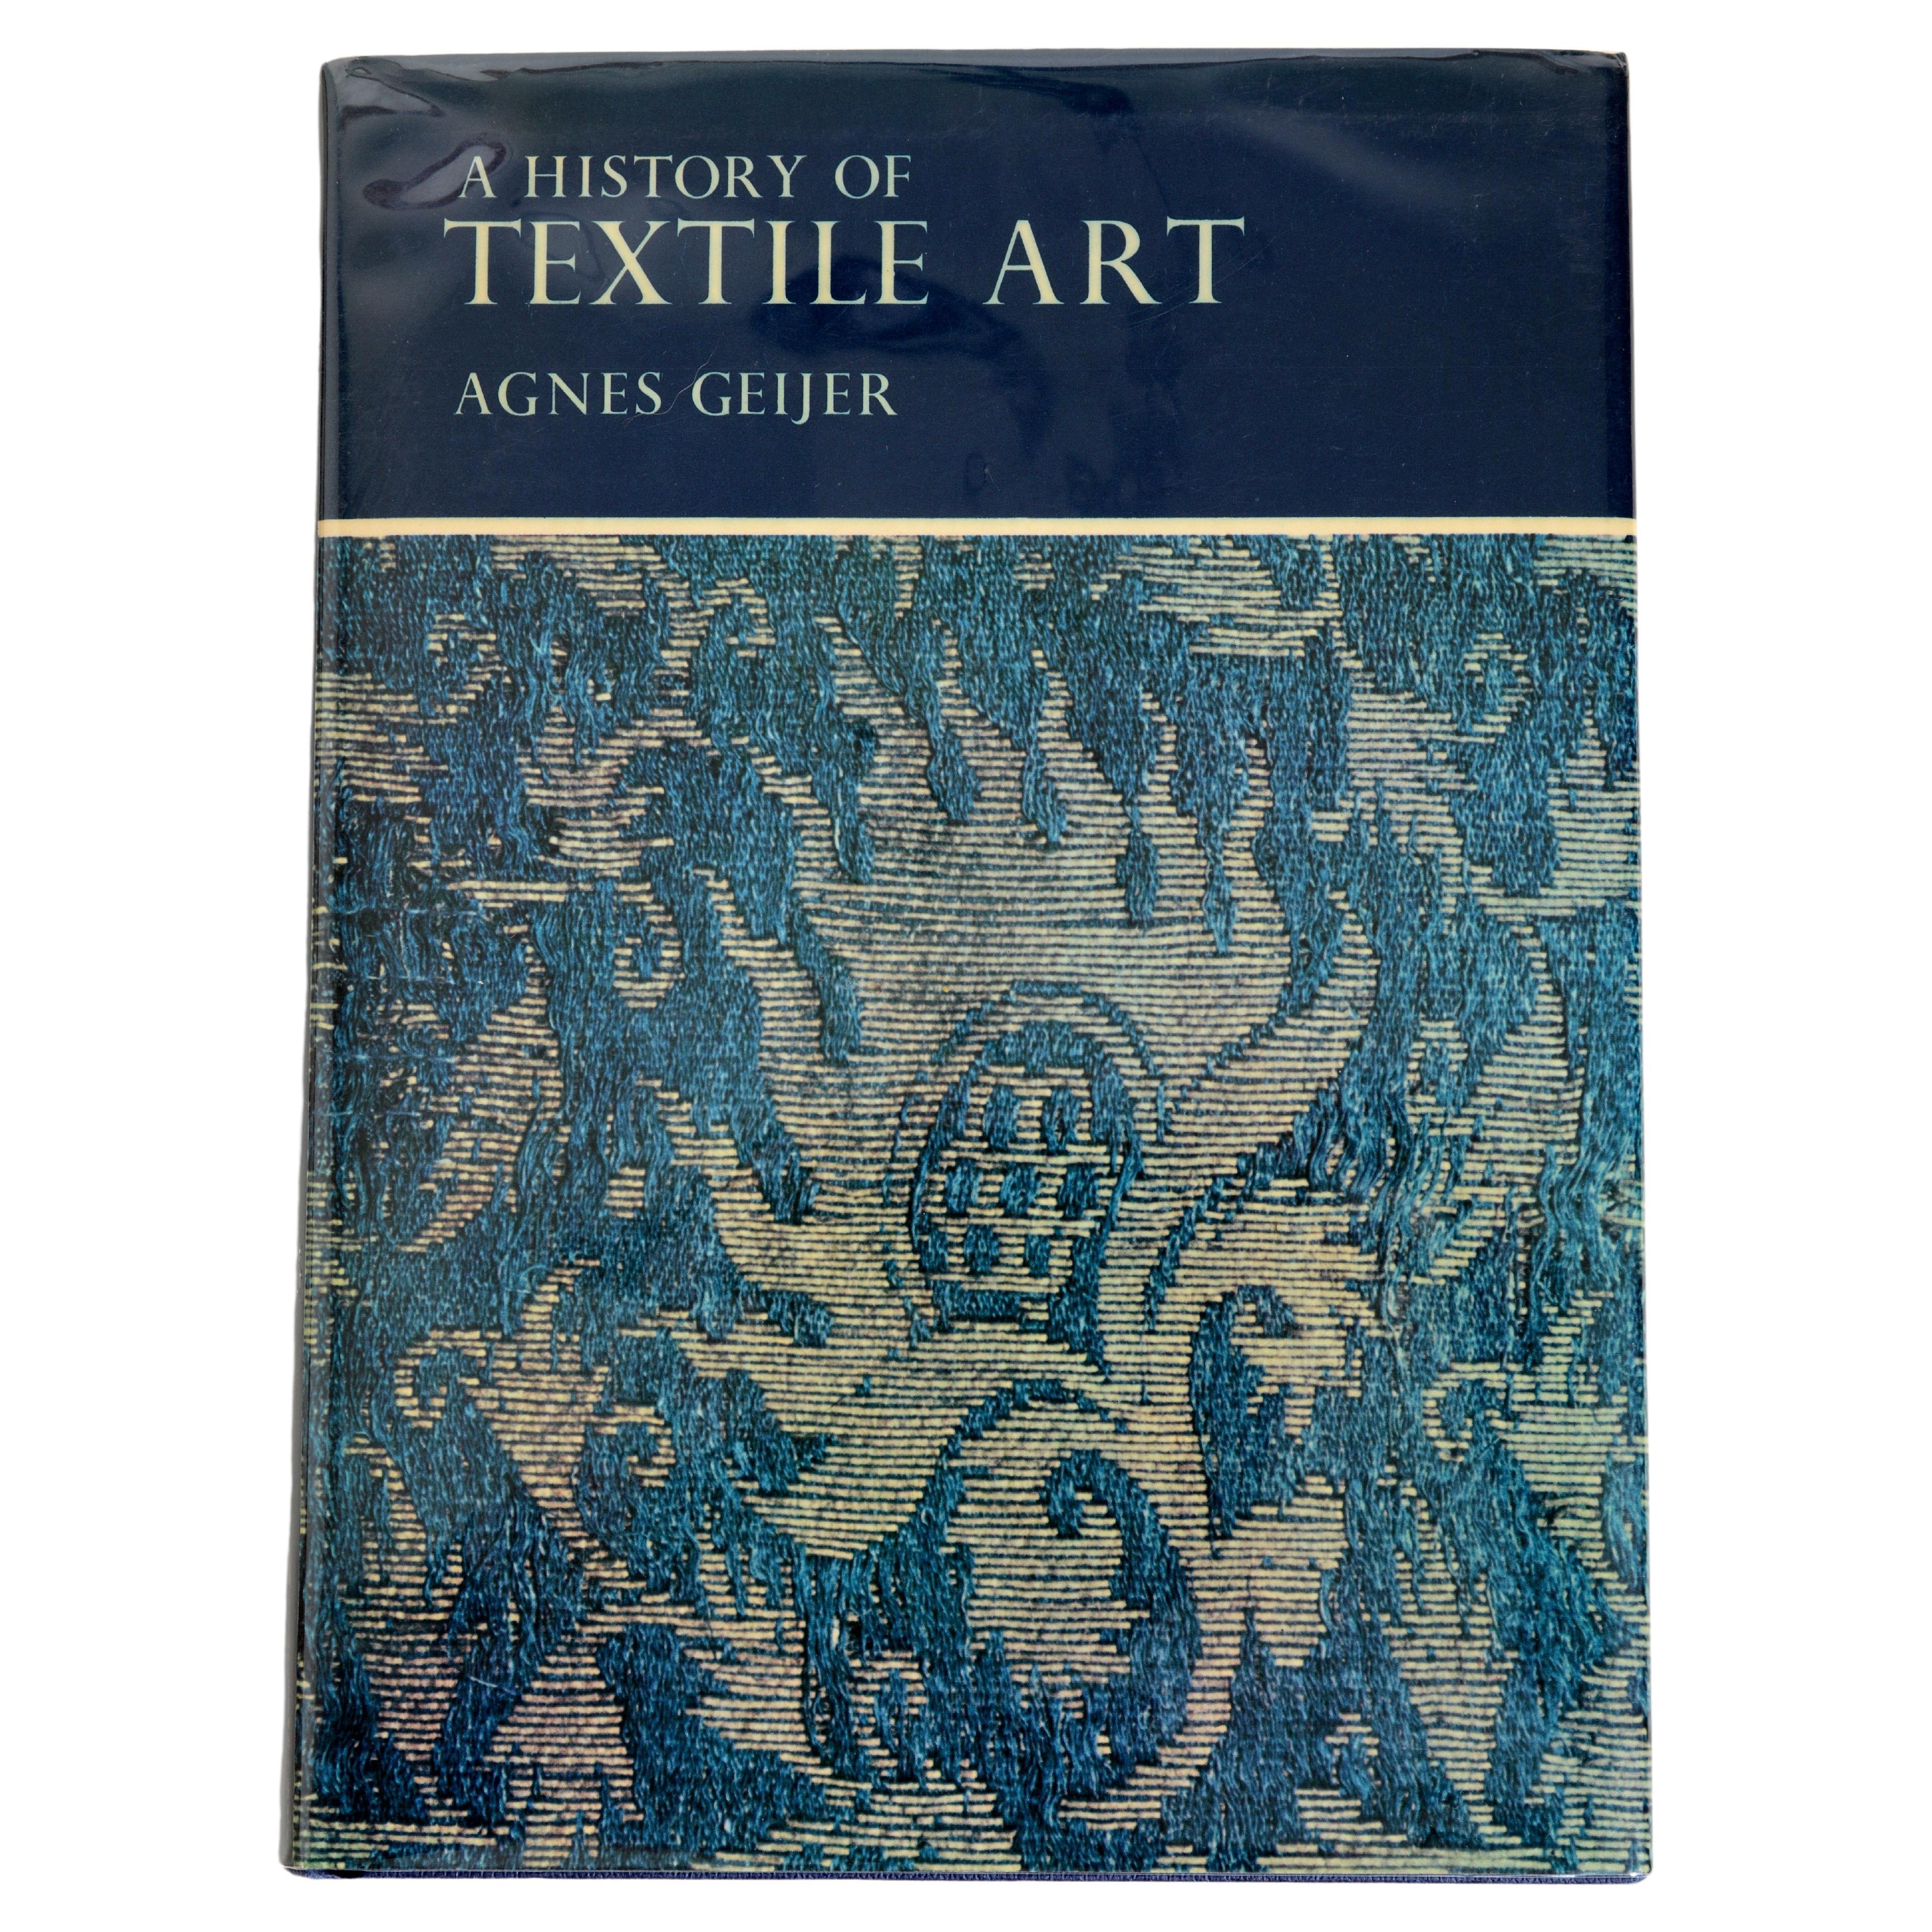 A History of Textile Art by Agnes Geijer